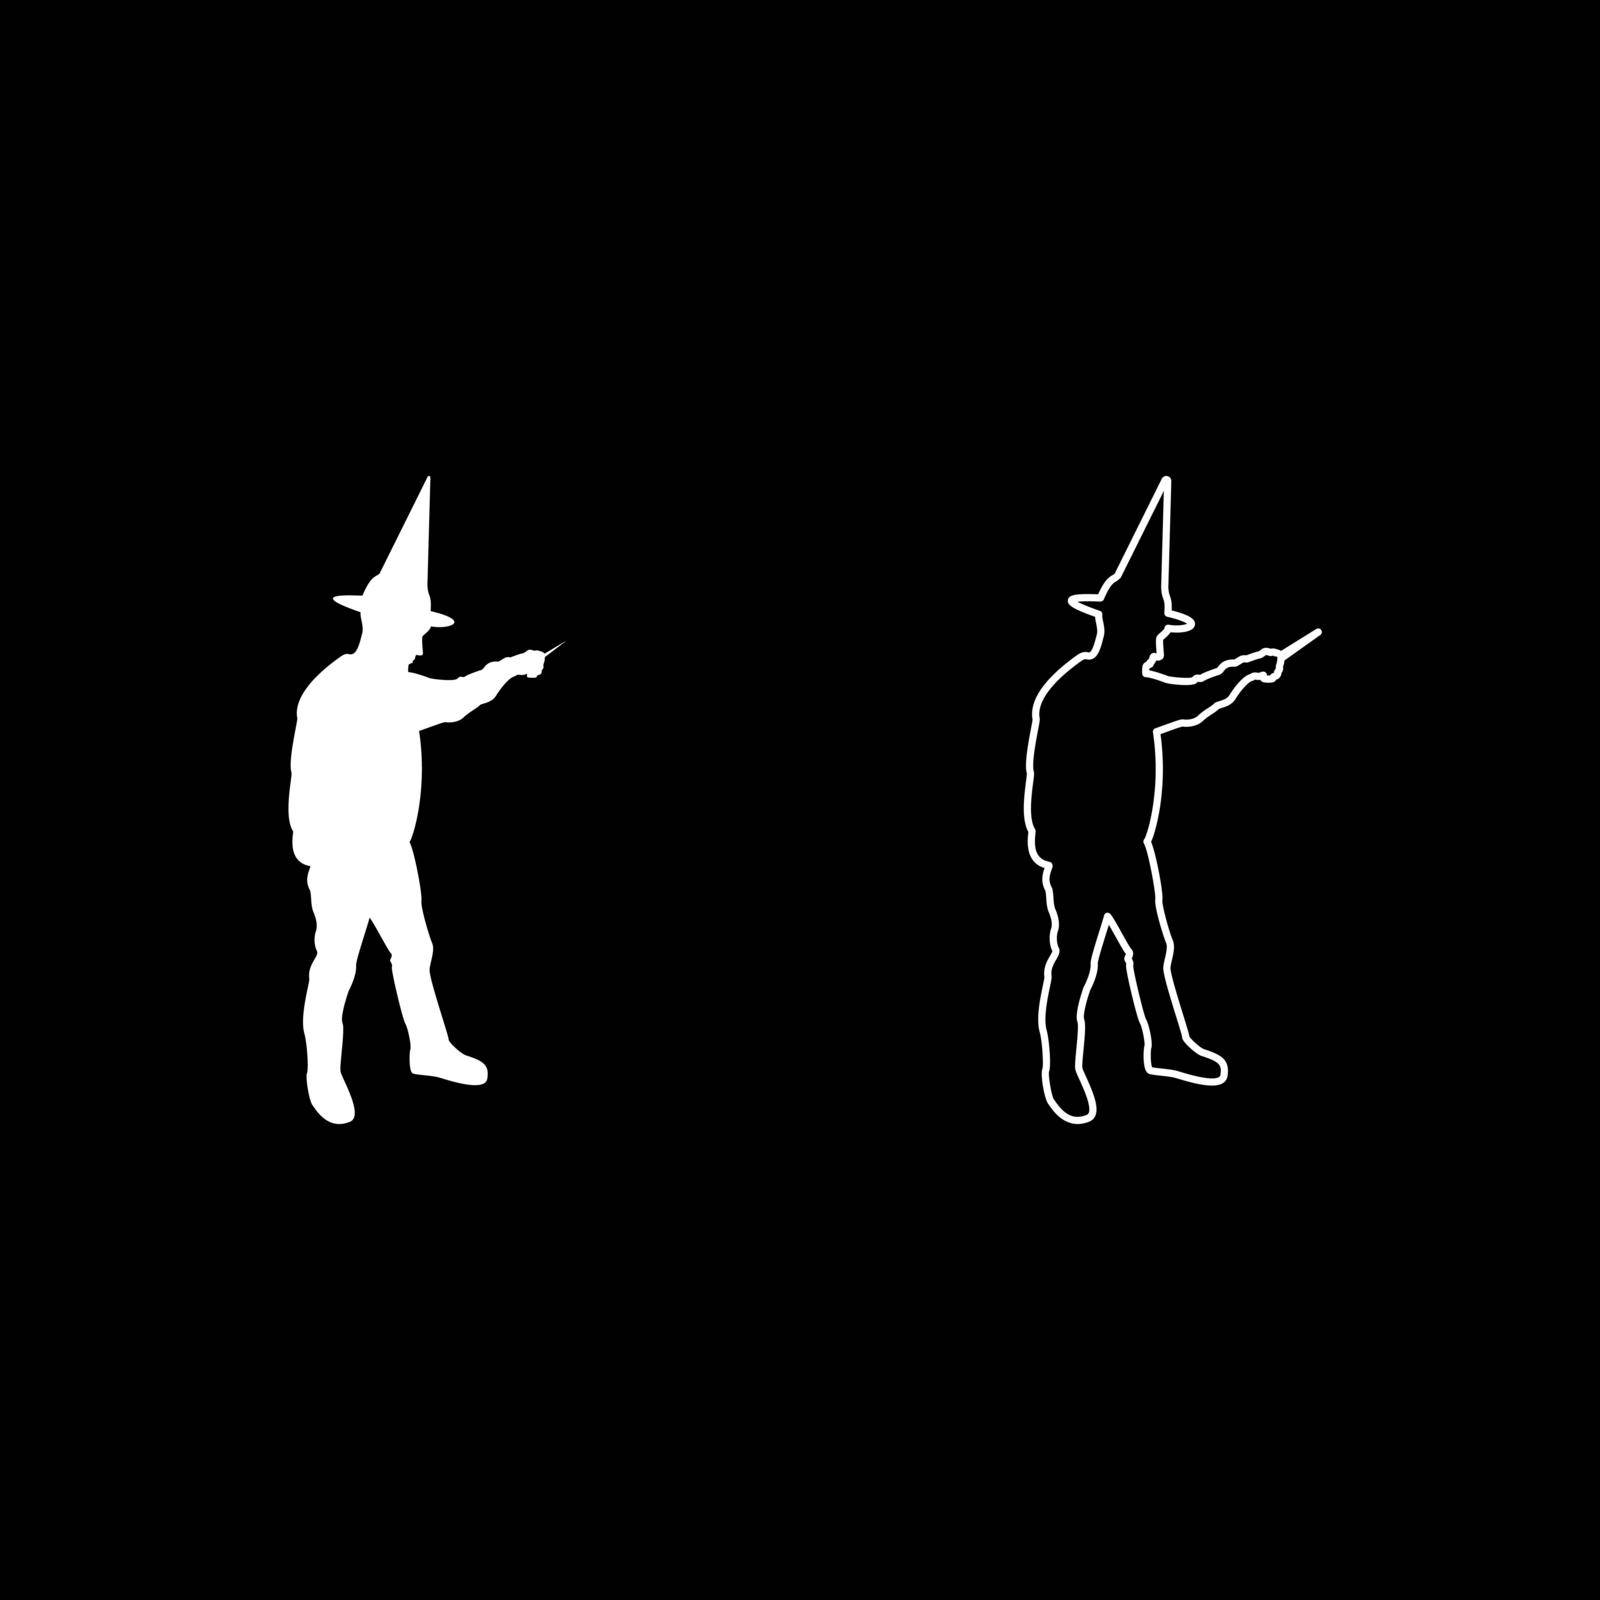 Wizard holds magic wand trick Waving Sorcery concept Magician Sorcerer Fantasy person Warlock man in robe with magical stick Witchcraft in hat mantle Mage conjure Mystery idea Enchantment silhouette white color vector illustration solid outline style image by serhii435